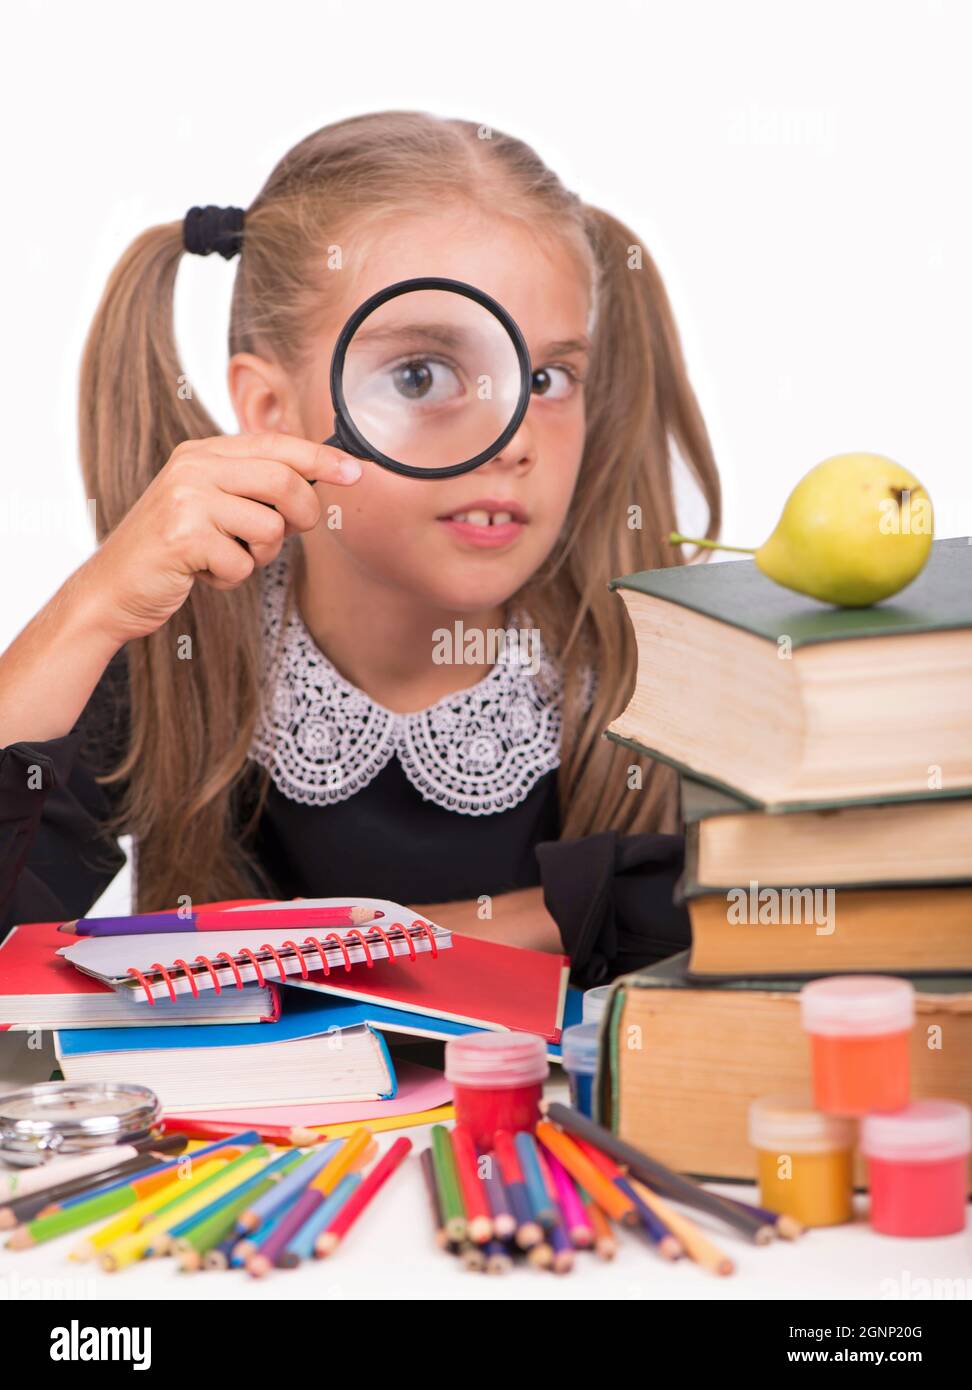 Little girl, blonde in a school dress looks through a magnifying glass on a white background Stock Photo